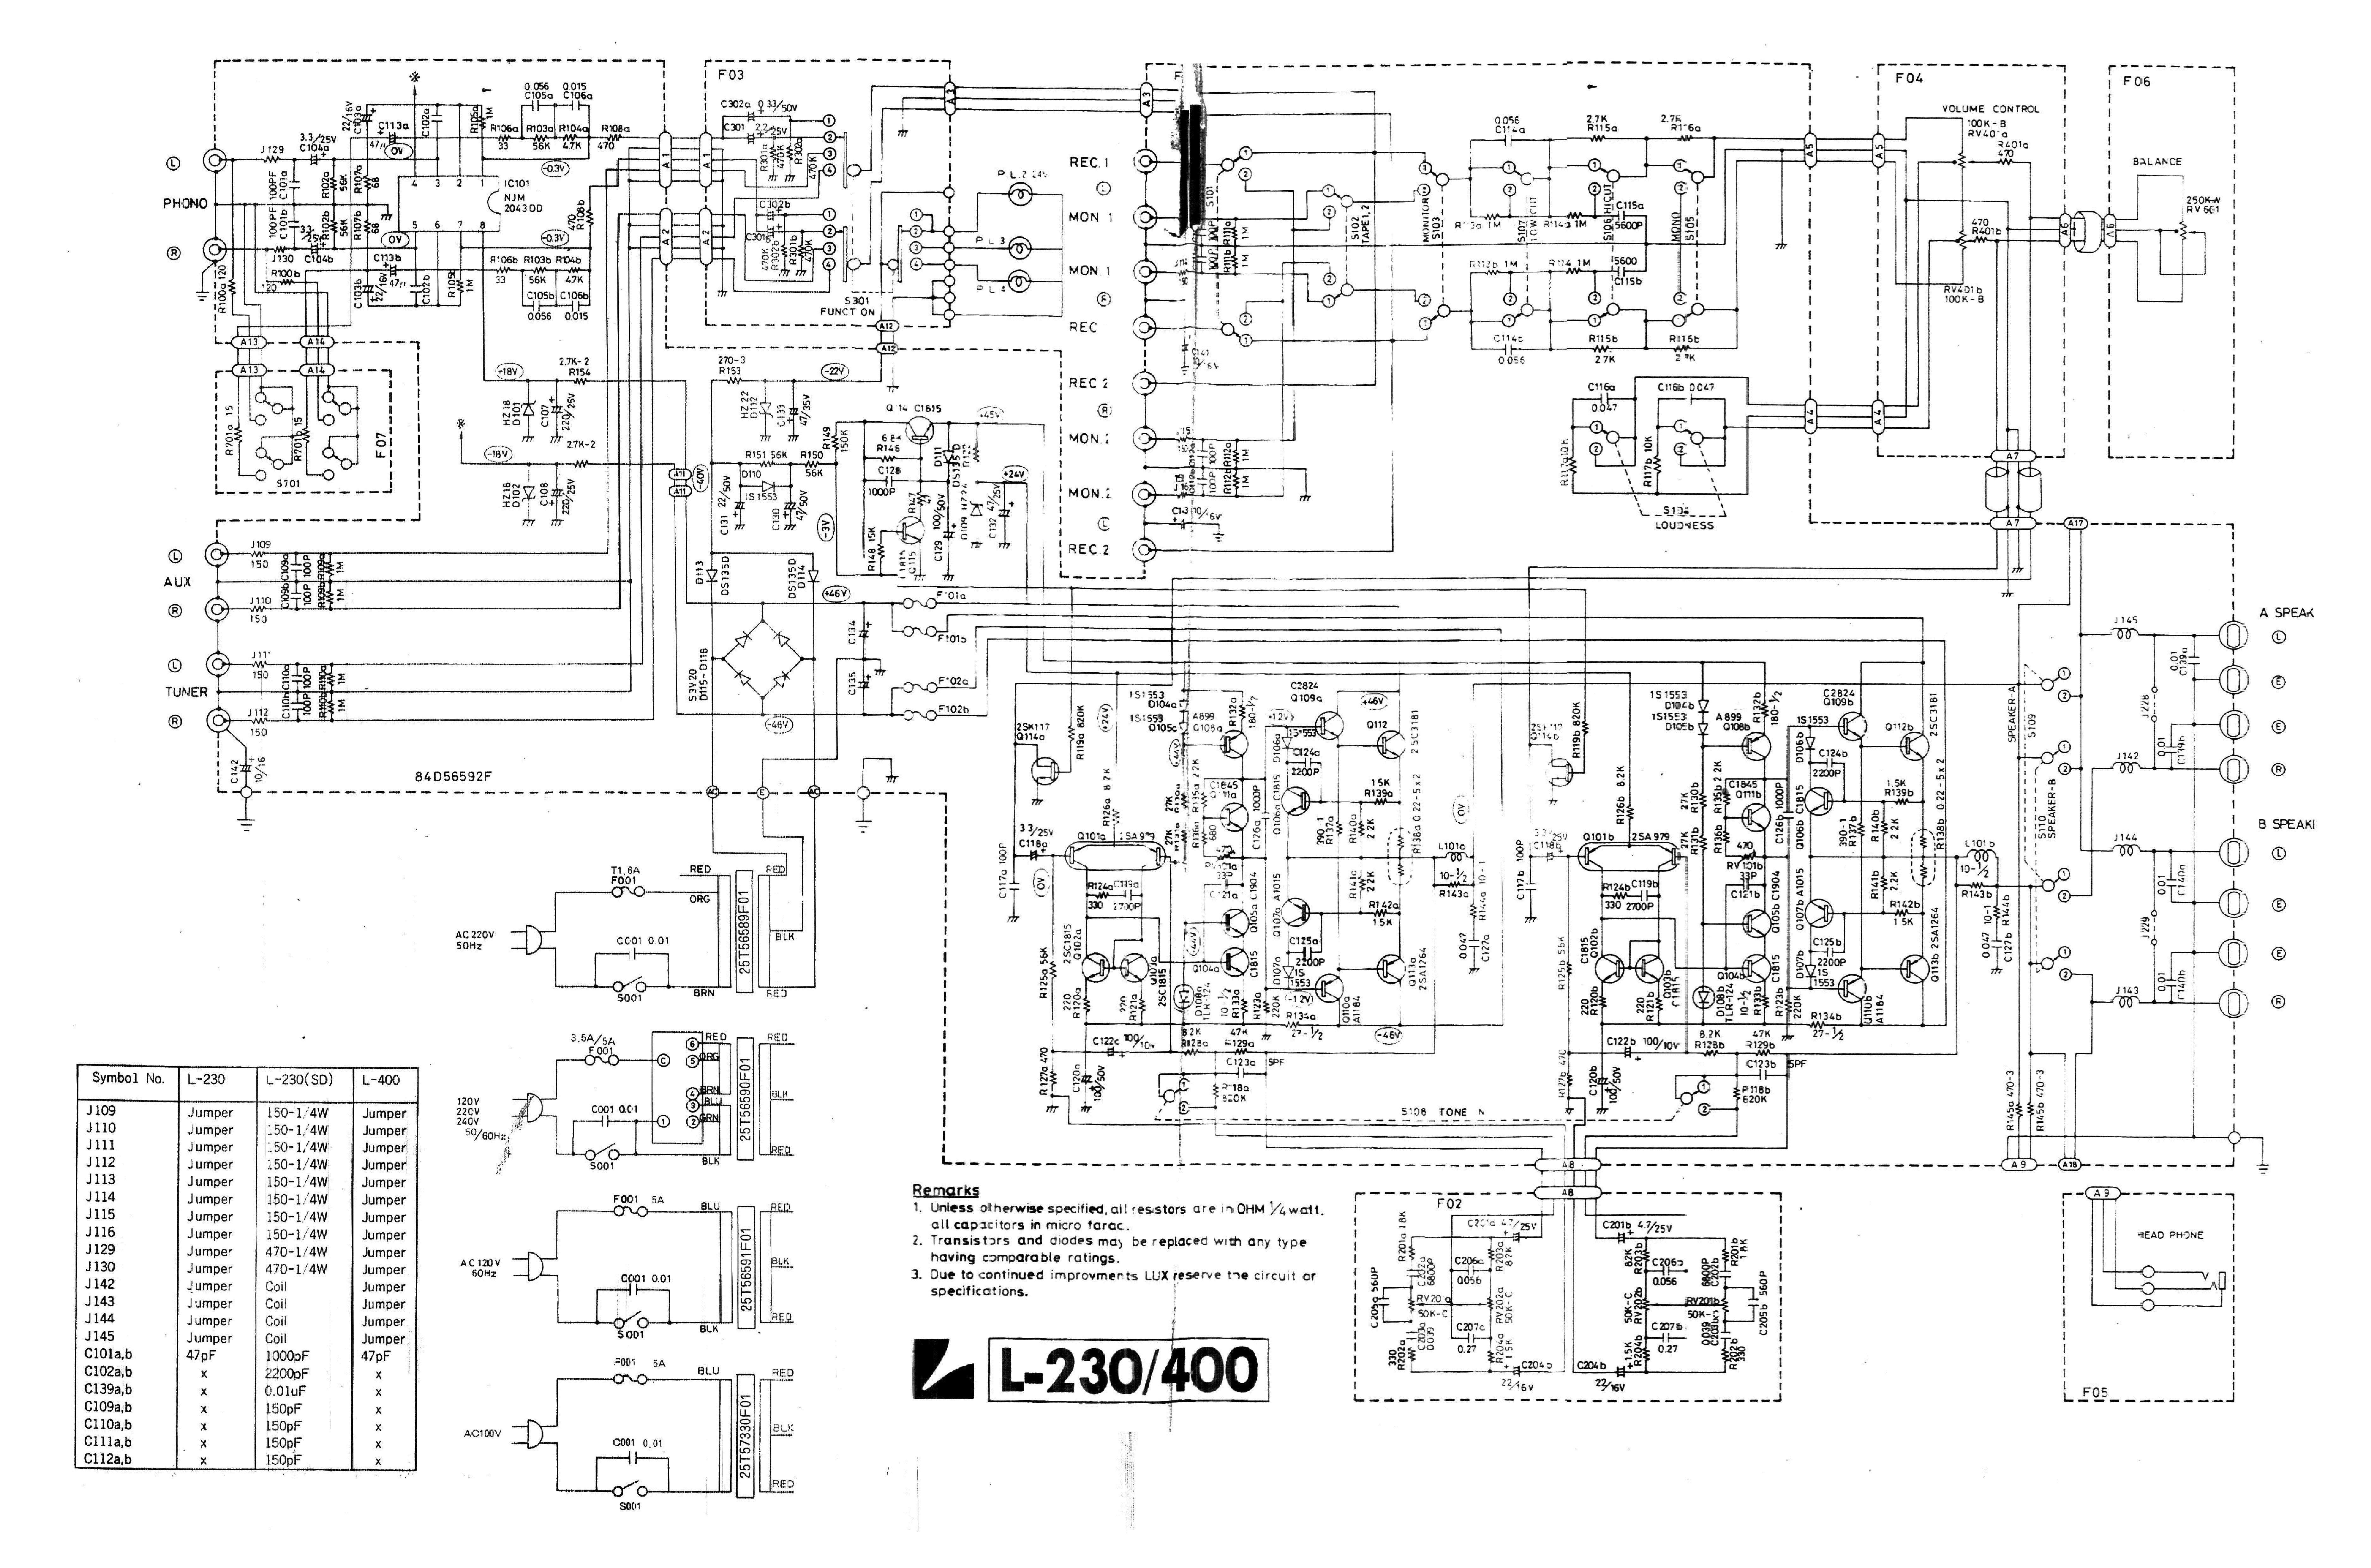 LUXMAN L-400 L-230 SCHEMATIC Service Manual download, schematics, eeprom,  repair info for electronics experts